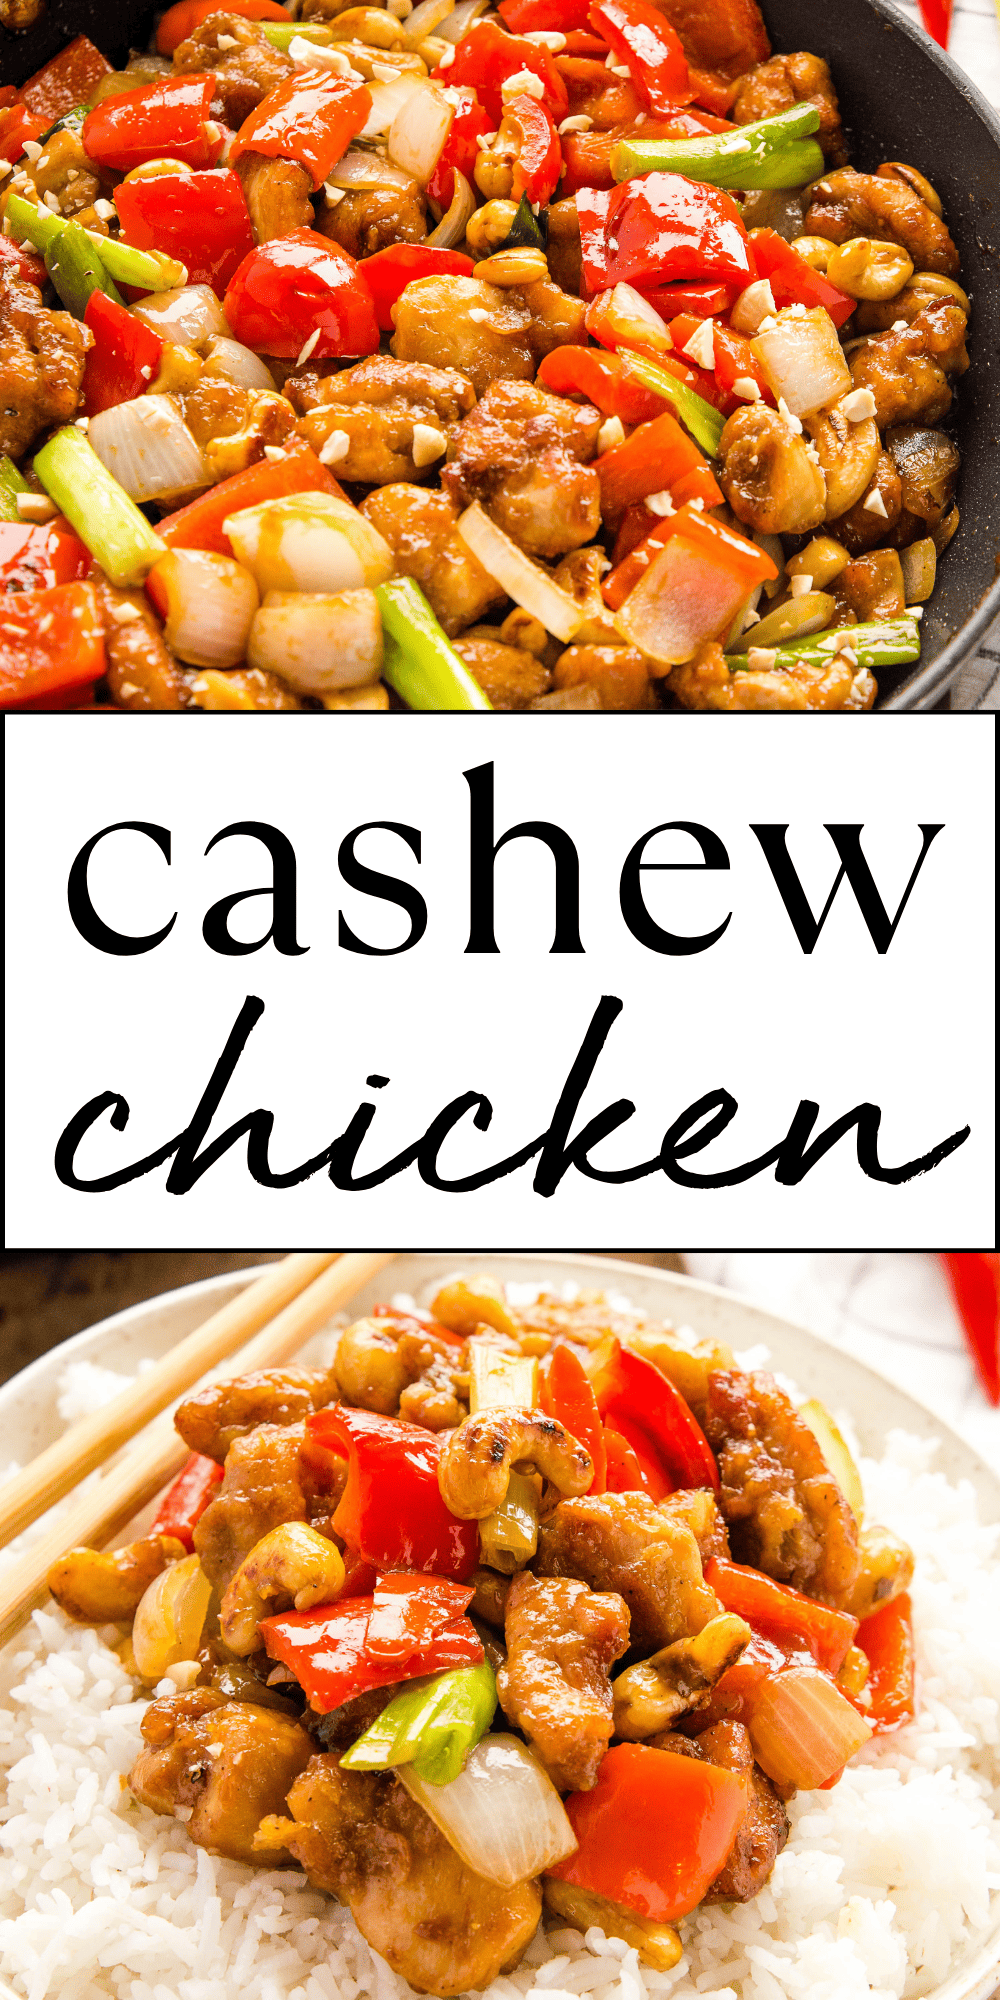 This Cashew Chicken recipe is an easy take-out style meal - stir fry veggies and chicken with cashew nuts, toasted to perfection and served with a simple stir fry sauce. The best homemade chicken cashew that's ready in 30 minutes or less! Recipe from thebusybaker.ca! #cashewchicken #chickencashew #chickenwithcashewnuts #chinesechickencashew #easymeal #easydinner #takeoutrecipe #copycatrecipe #30minutemeal via @busybakerblog